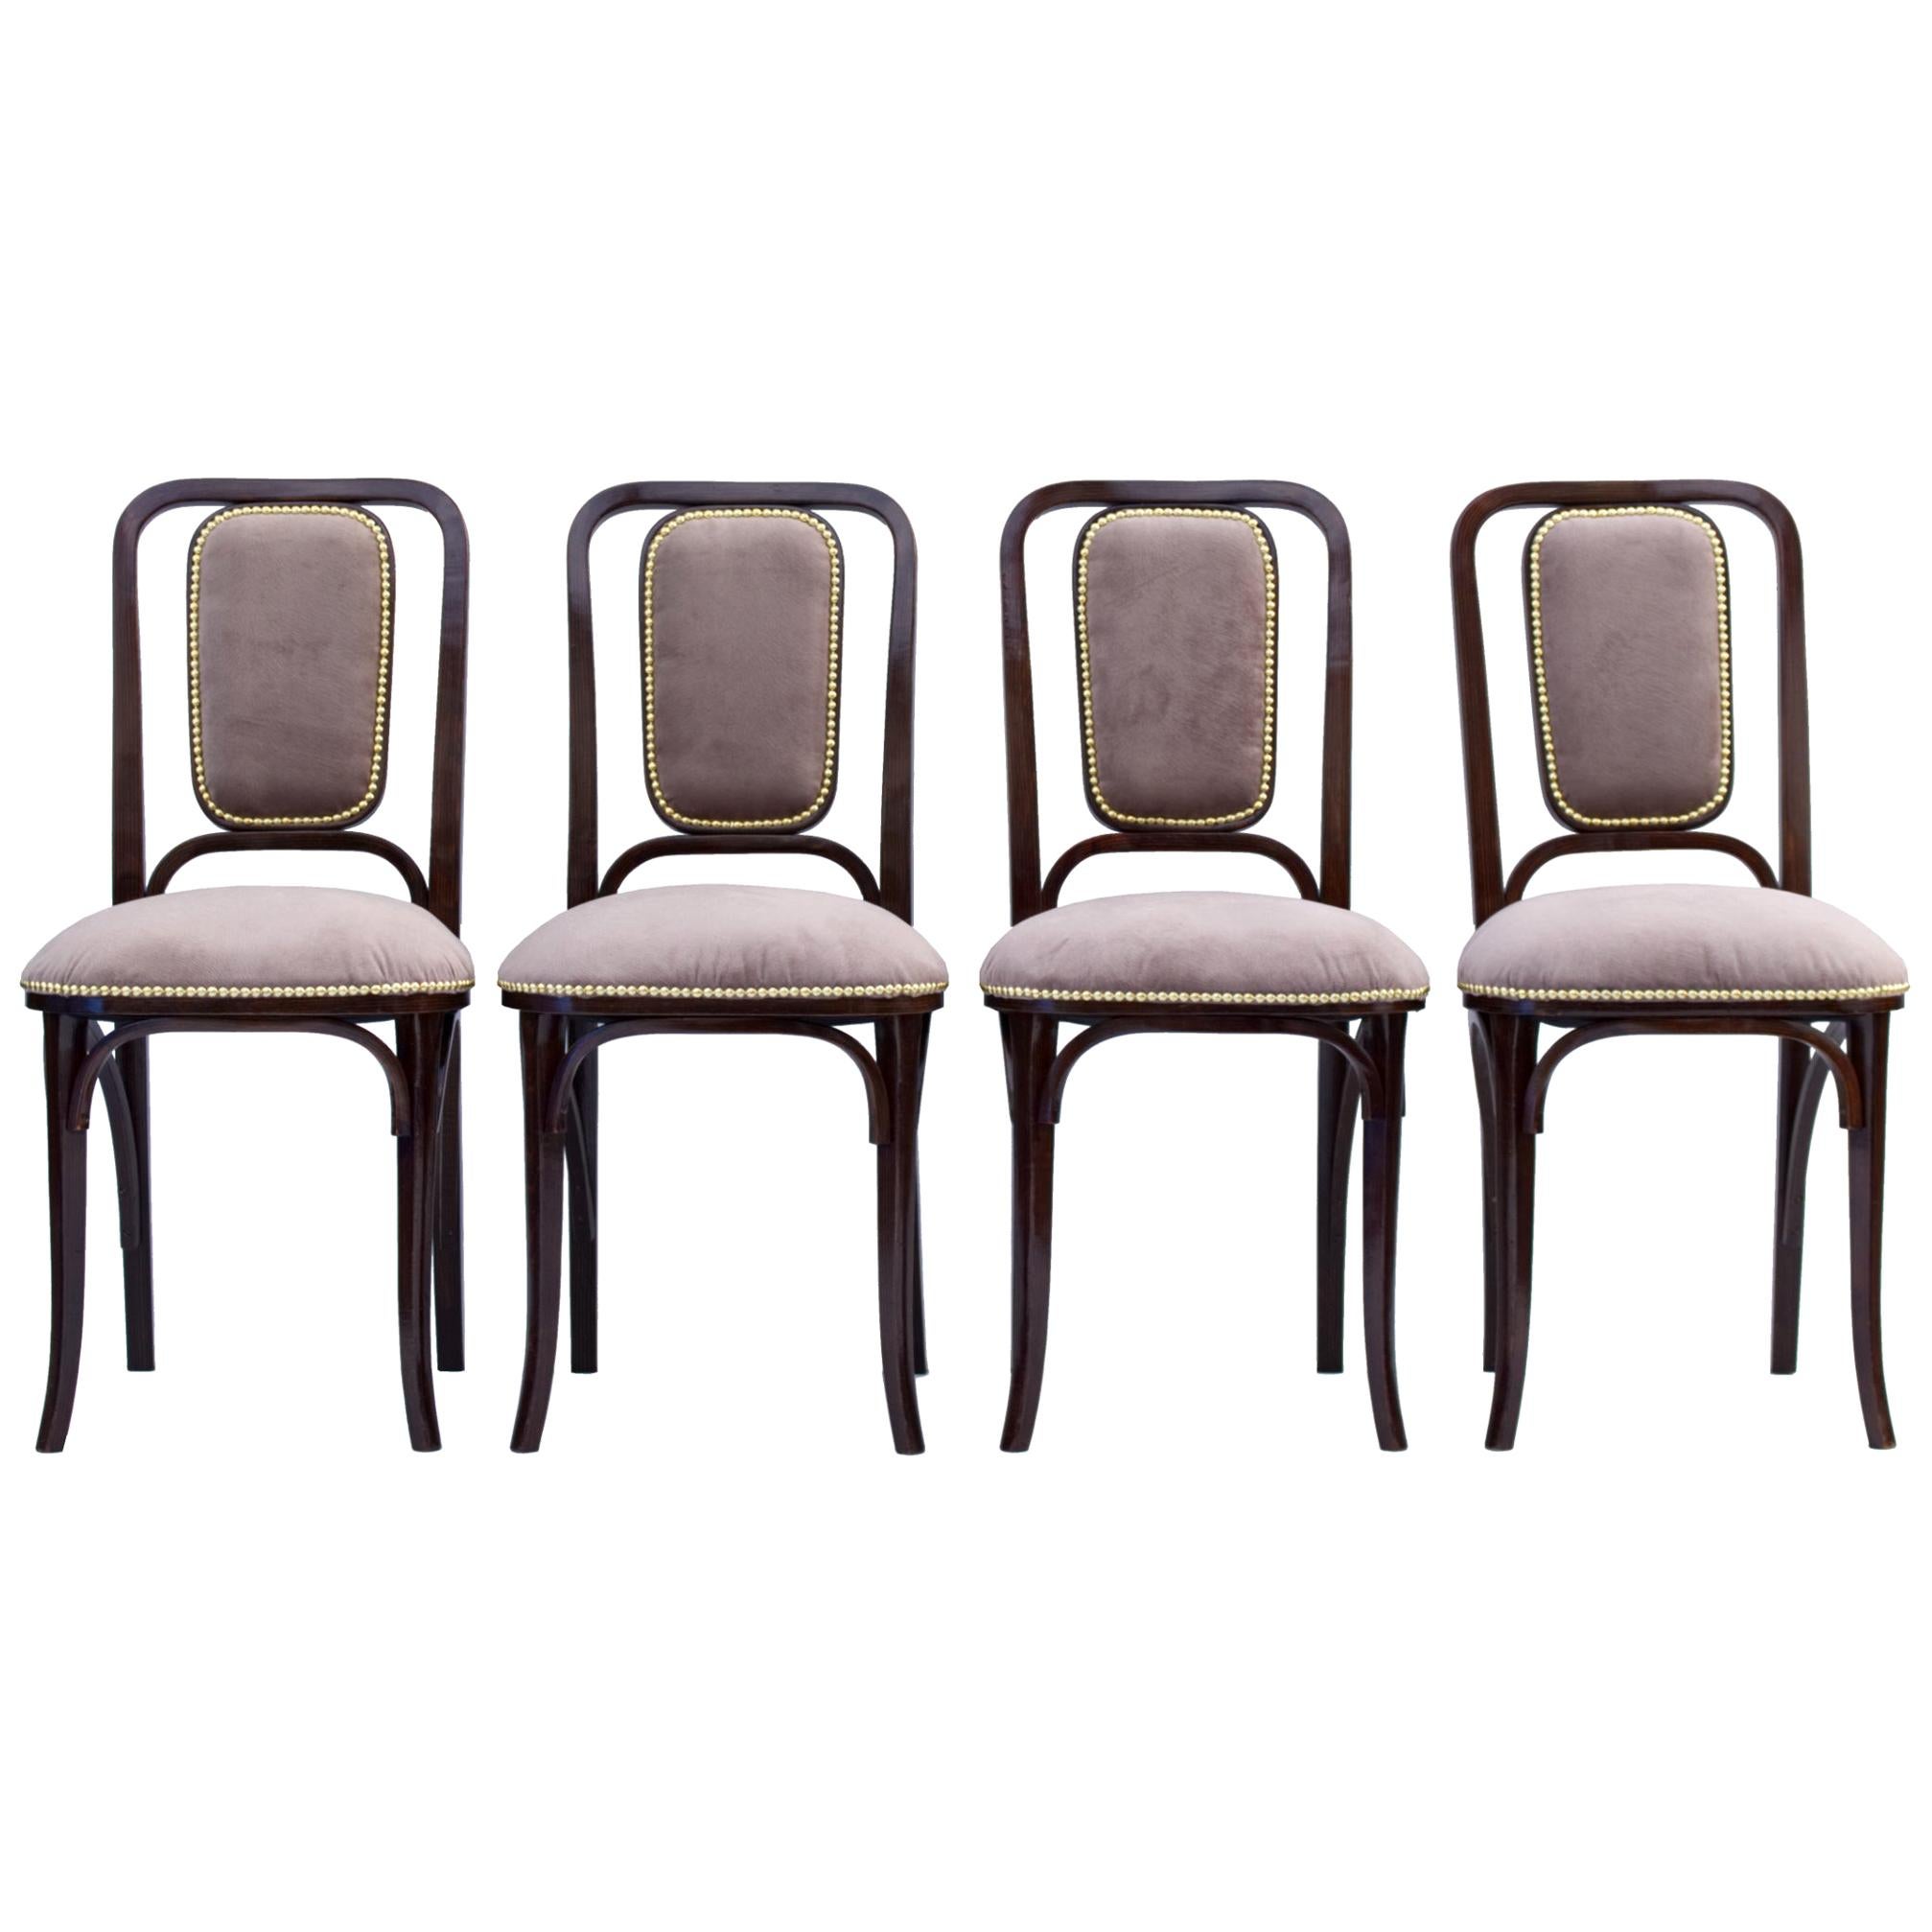 Art Nouveau Bentwood Chairs by Thonet circa 1905, Set of 4